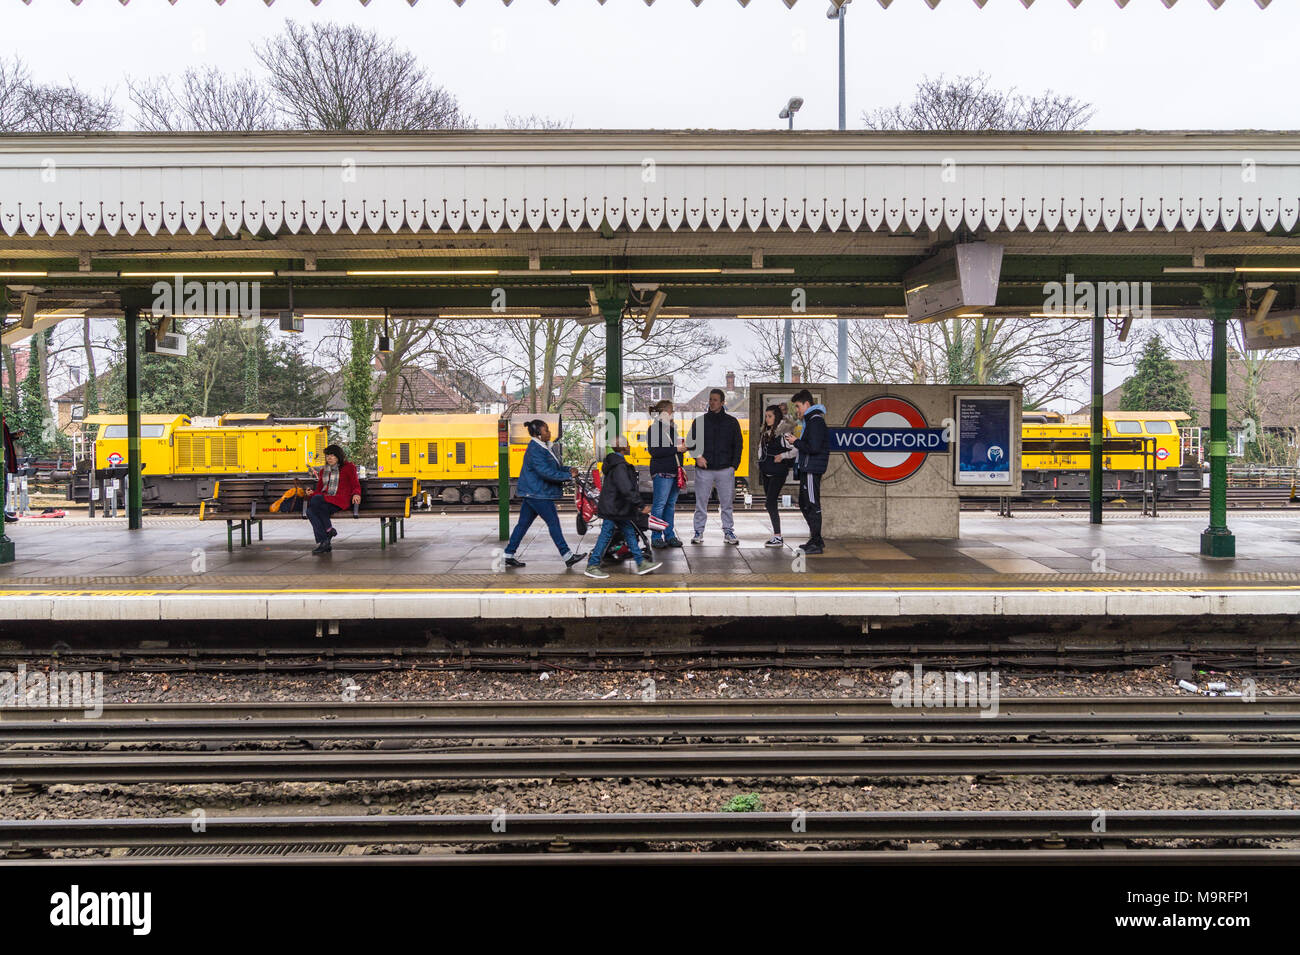 Passengers on the platform in front of a Schweerbau rail milling train parked in a siding at Woodford Underground station, Essex, England Stock Photo